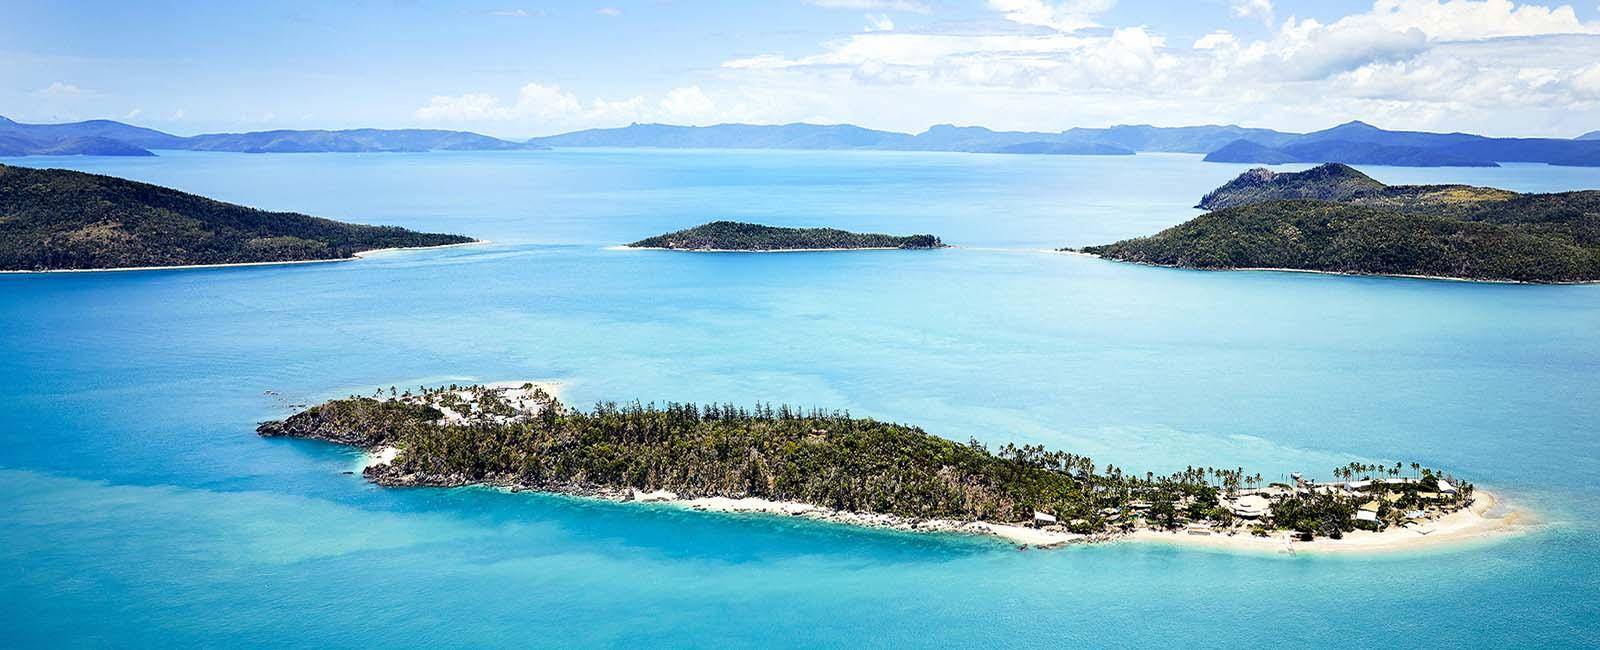 Daydream Island, Whitsundays, Queensland | 15 things to like about Daydream Island